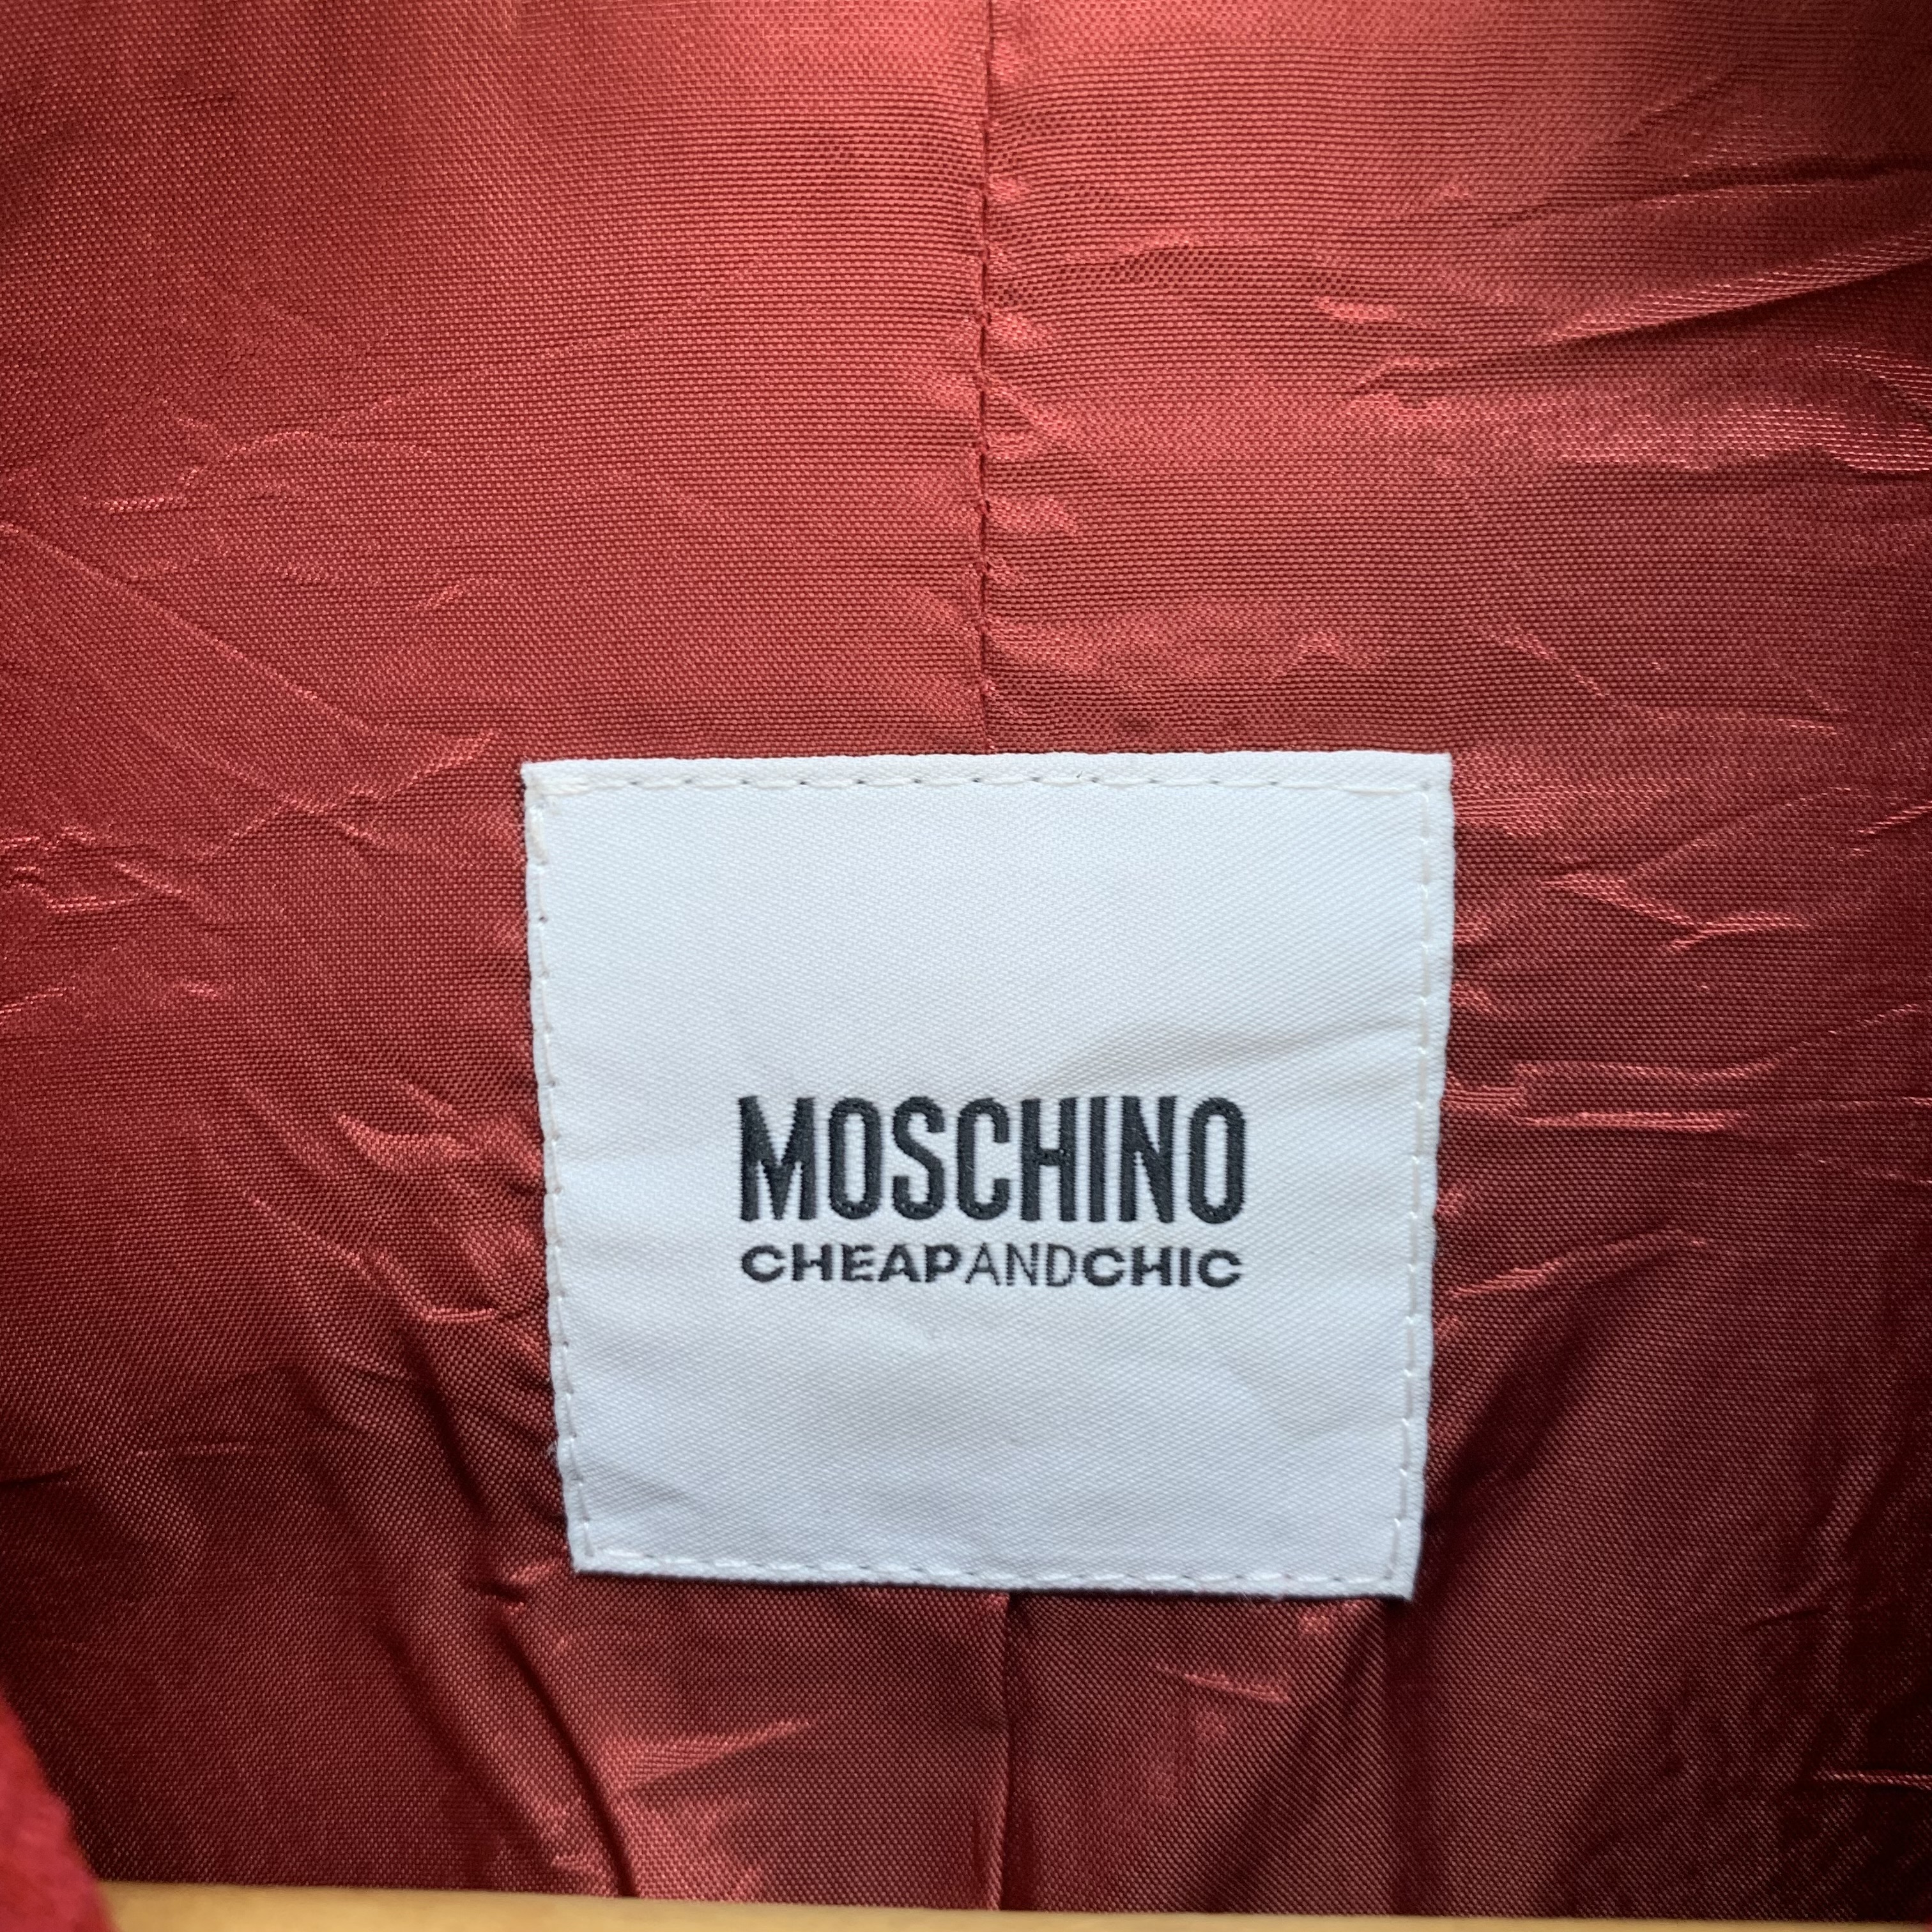 Moschino Cheap and Chic Red Double Breasted Coat #3952-137 - 6